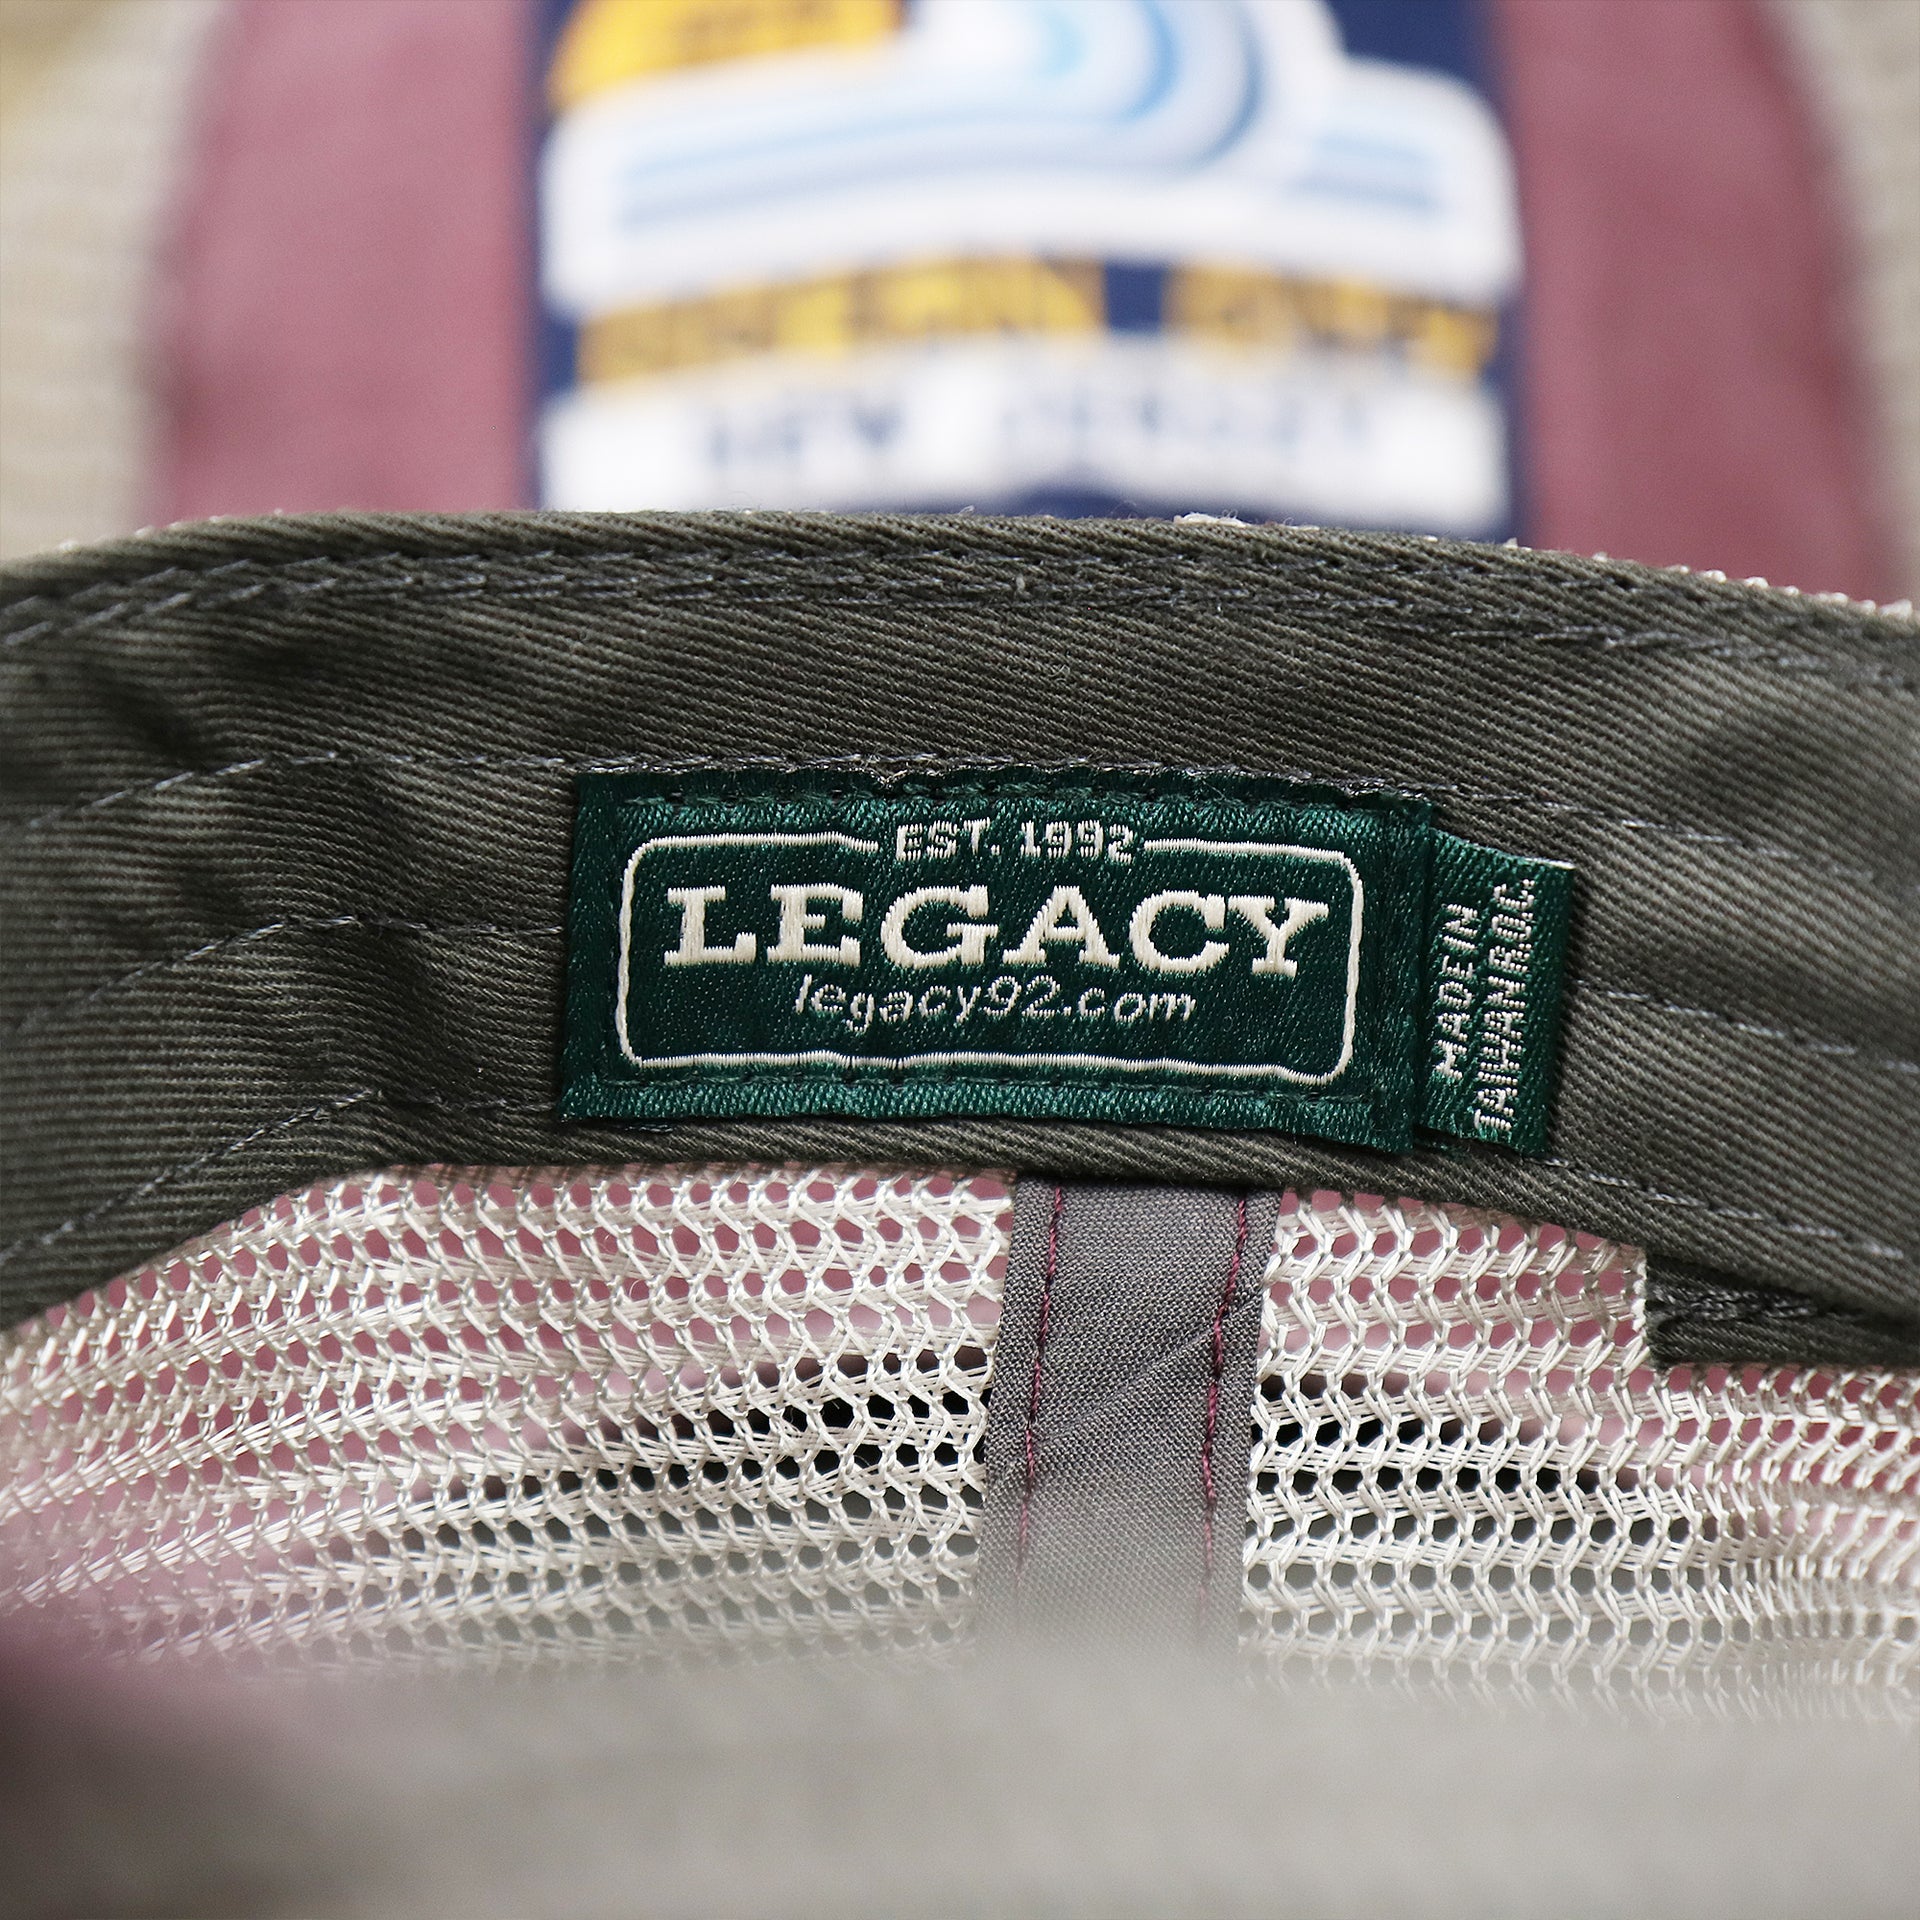 The Legacy Tag on the OCNJ 1879 Ocean City New Jersey Wave Trucker Hat | Burgundy And Khaki Mesh Trucker Hat